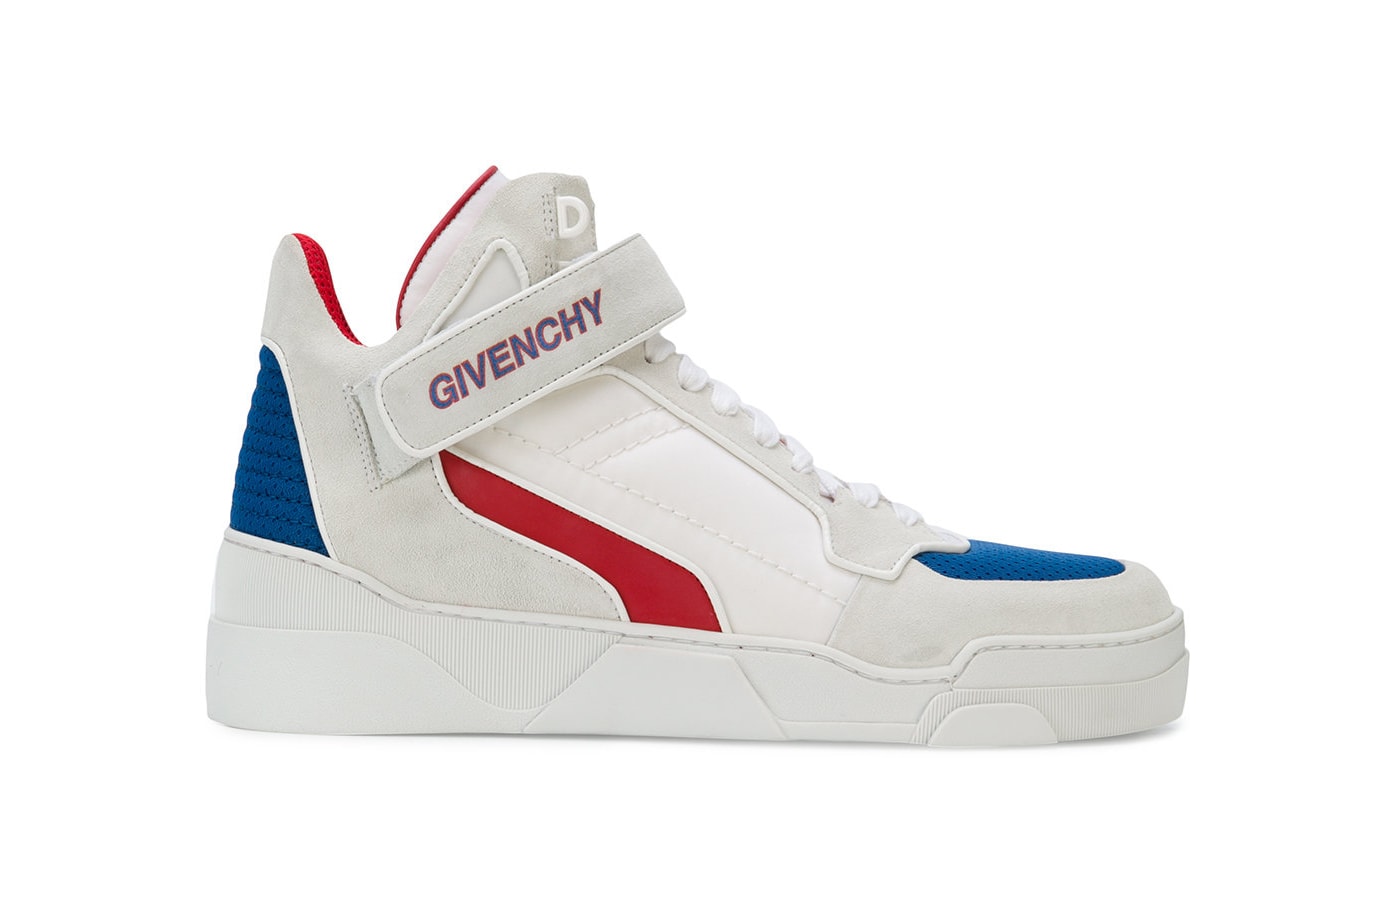 Givenchy Mid Sneakers red white blue 2018 spring summer february release date info shoes footwear farfetch